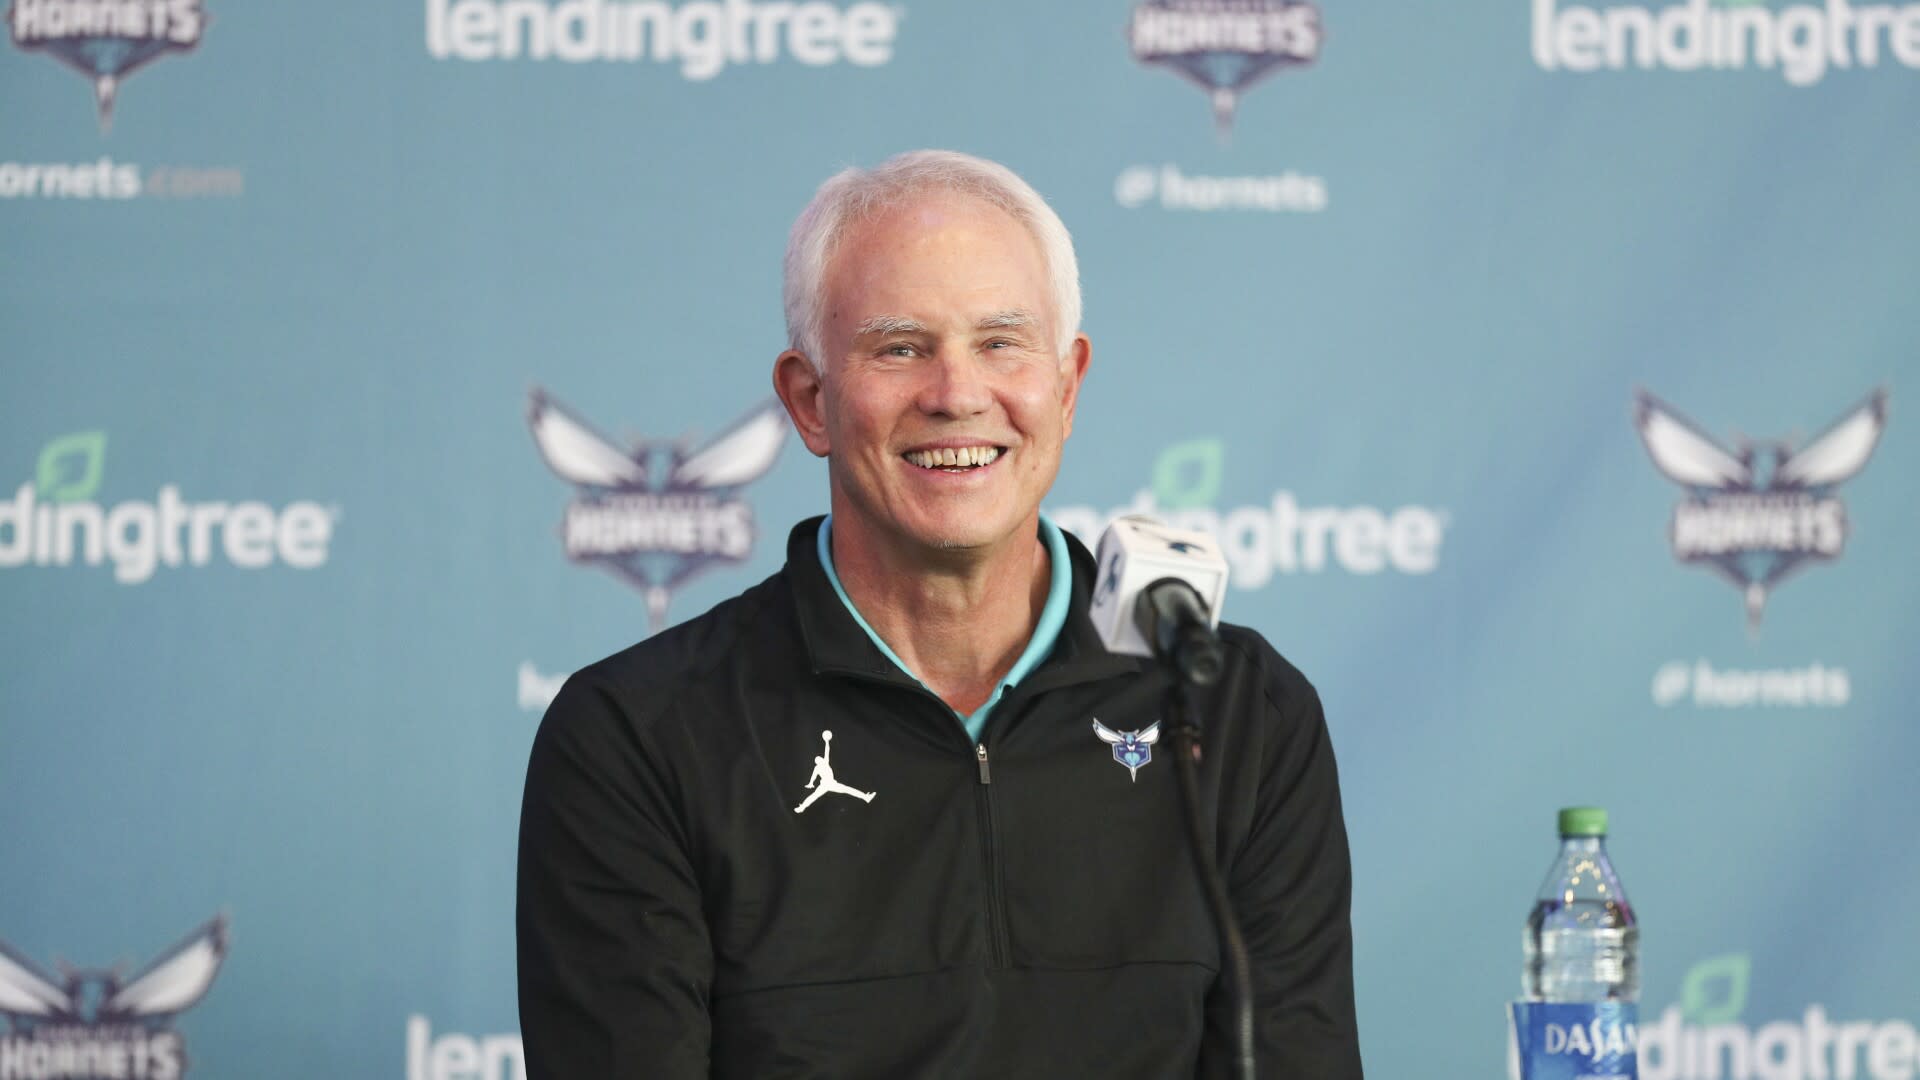 Mitch Kupchack to step aside as Hornets GM, starting organizational overhaul